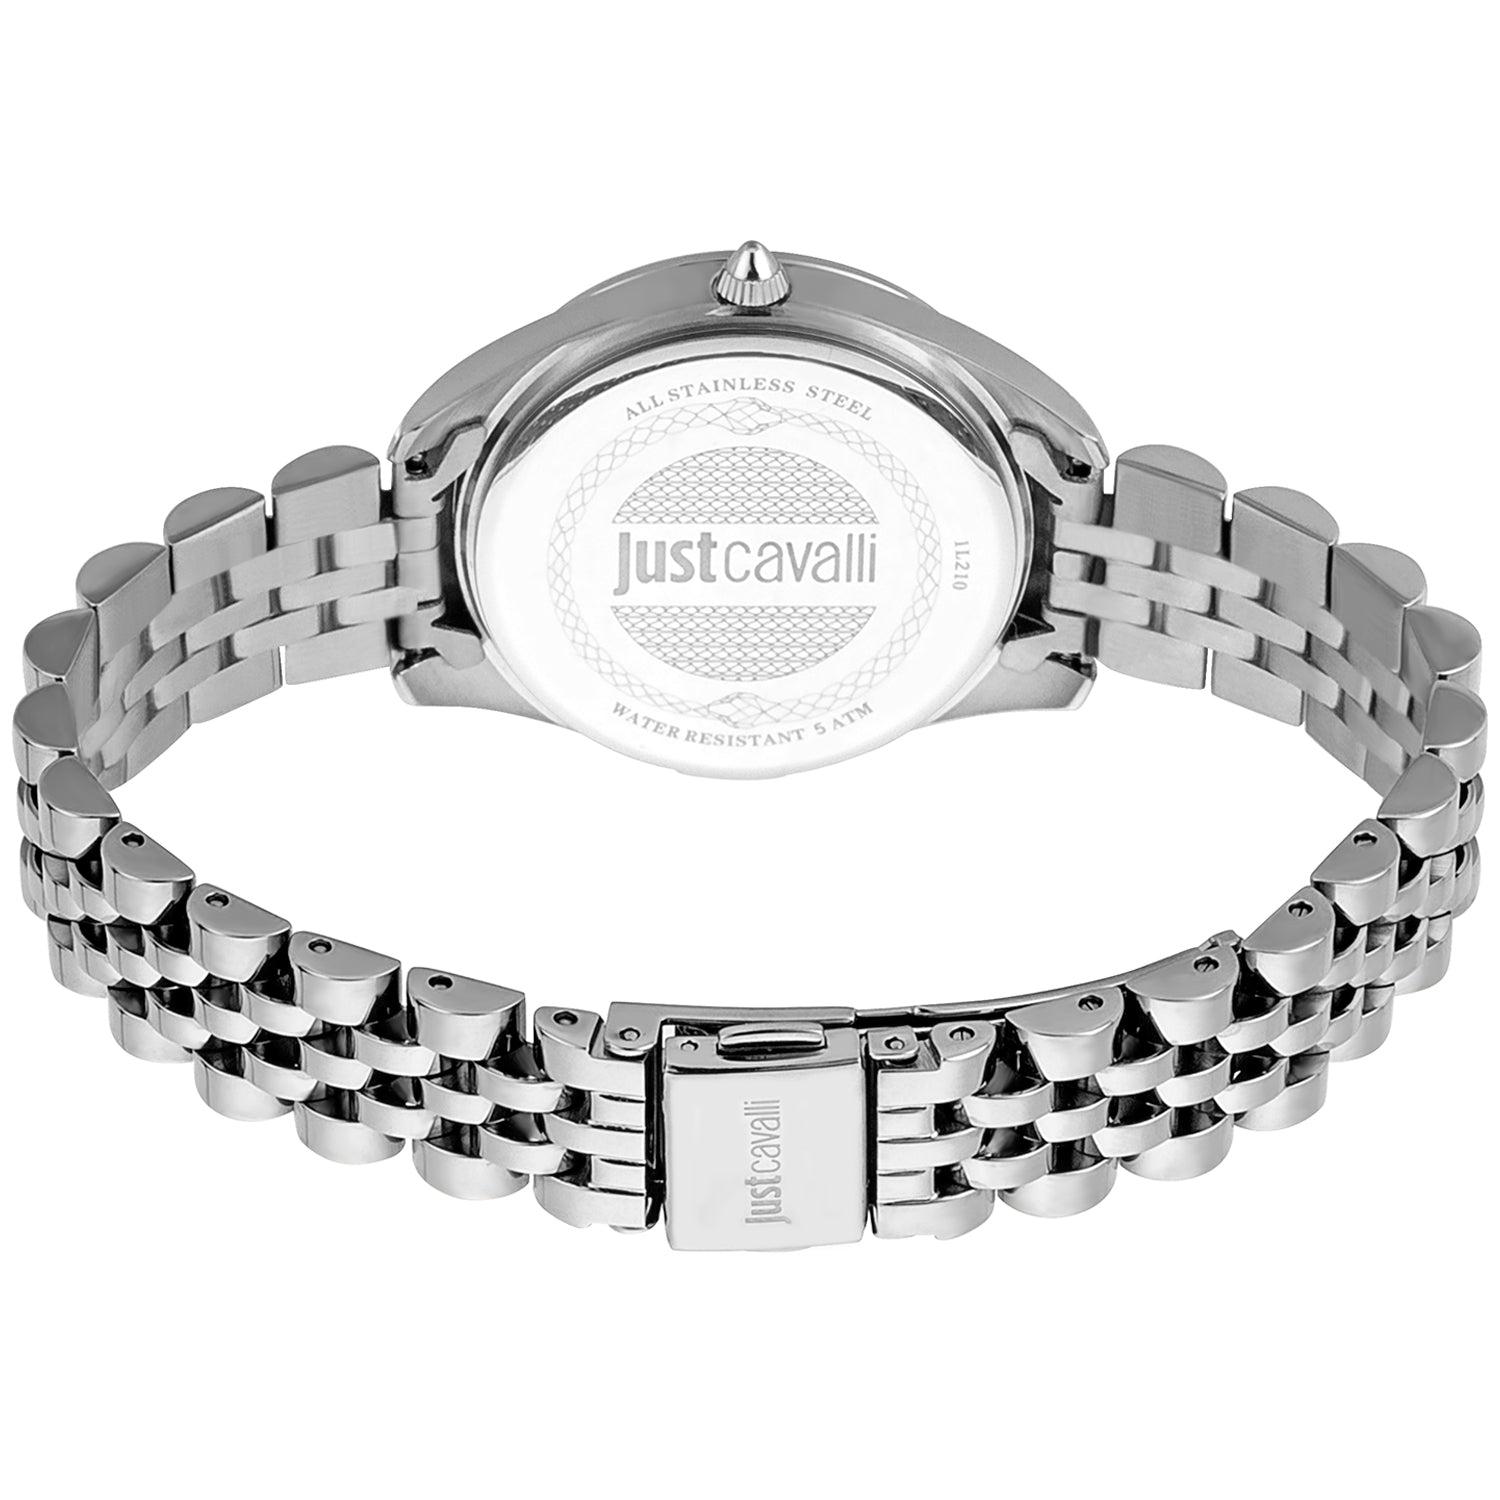 Just Cavalli Watches For Woman in Metallic | Lyst